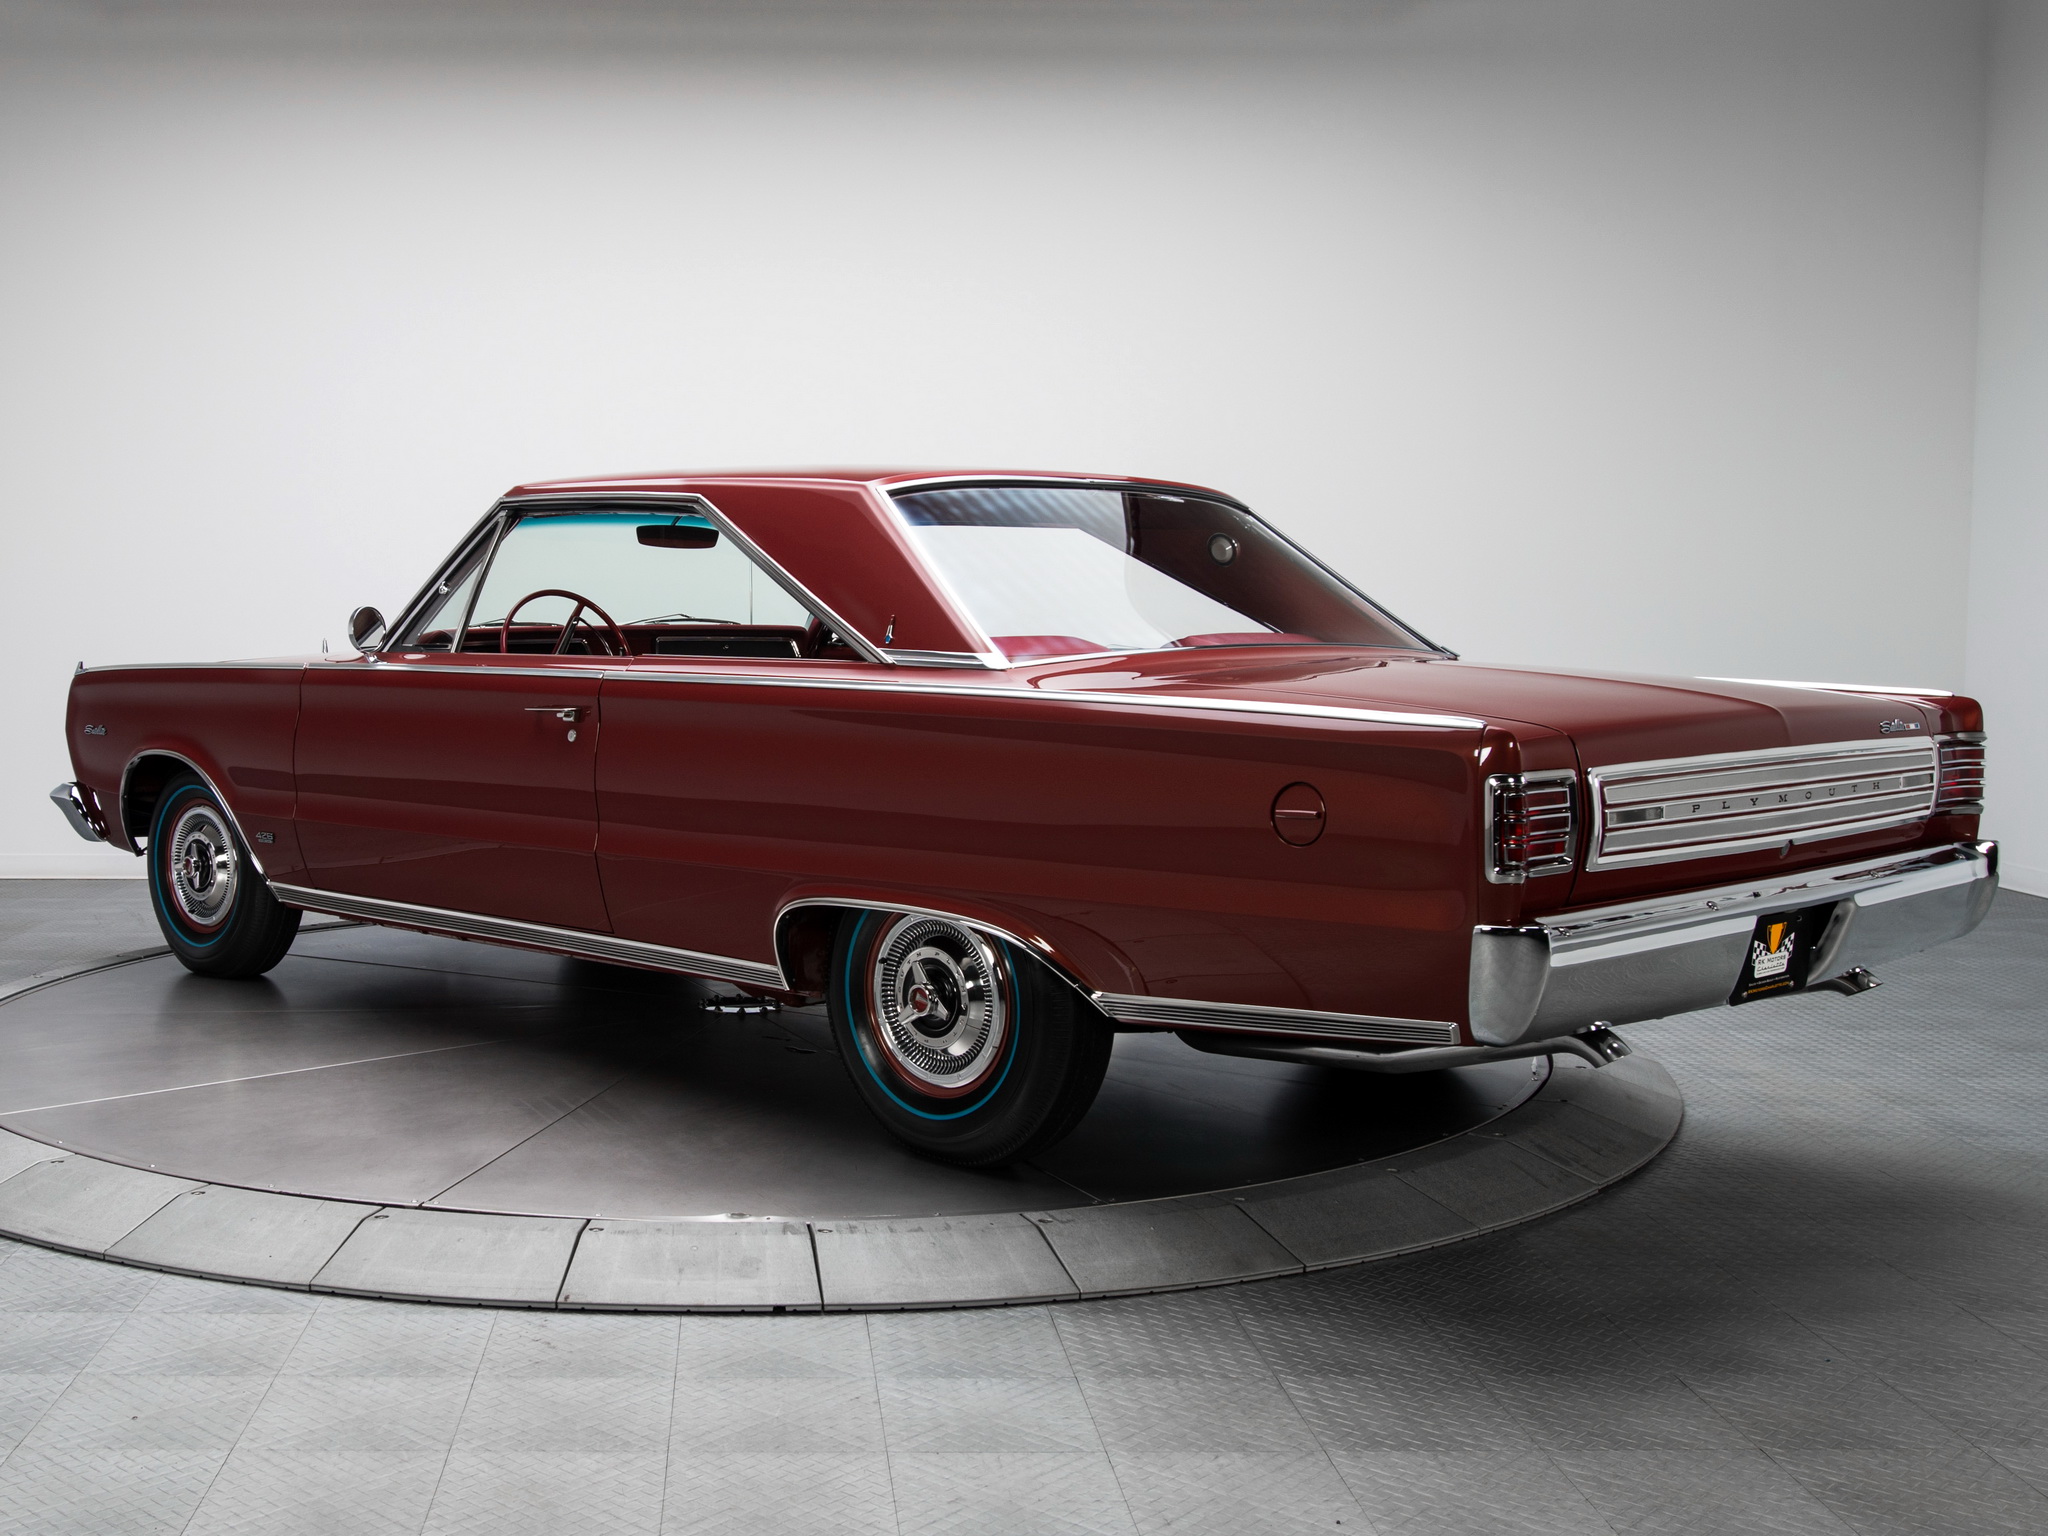 1966, Plymouth, Belvedere, Satellite, 426, Hemi, Hardtop, Coupe, Rp23, Muscle, Classic Wallpaper